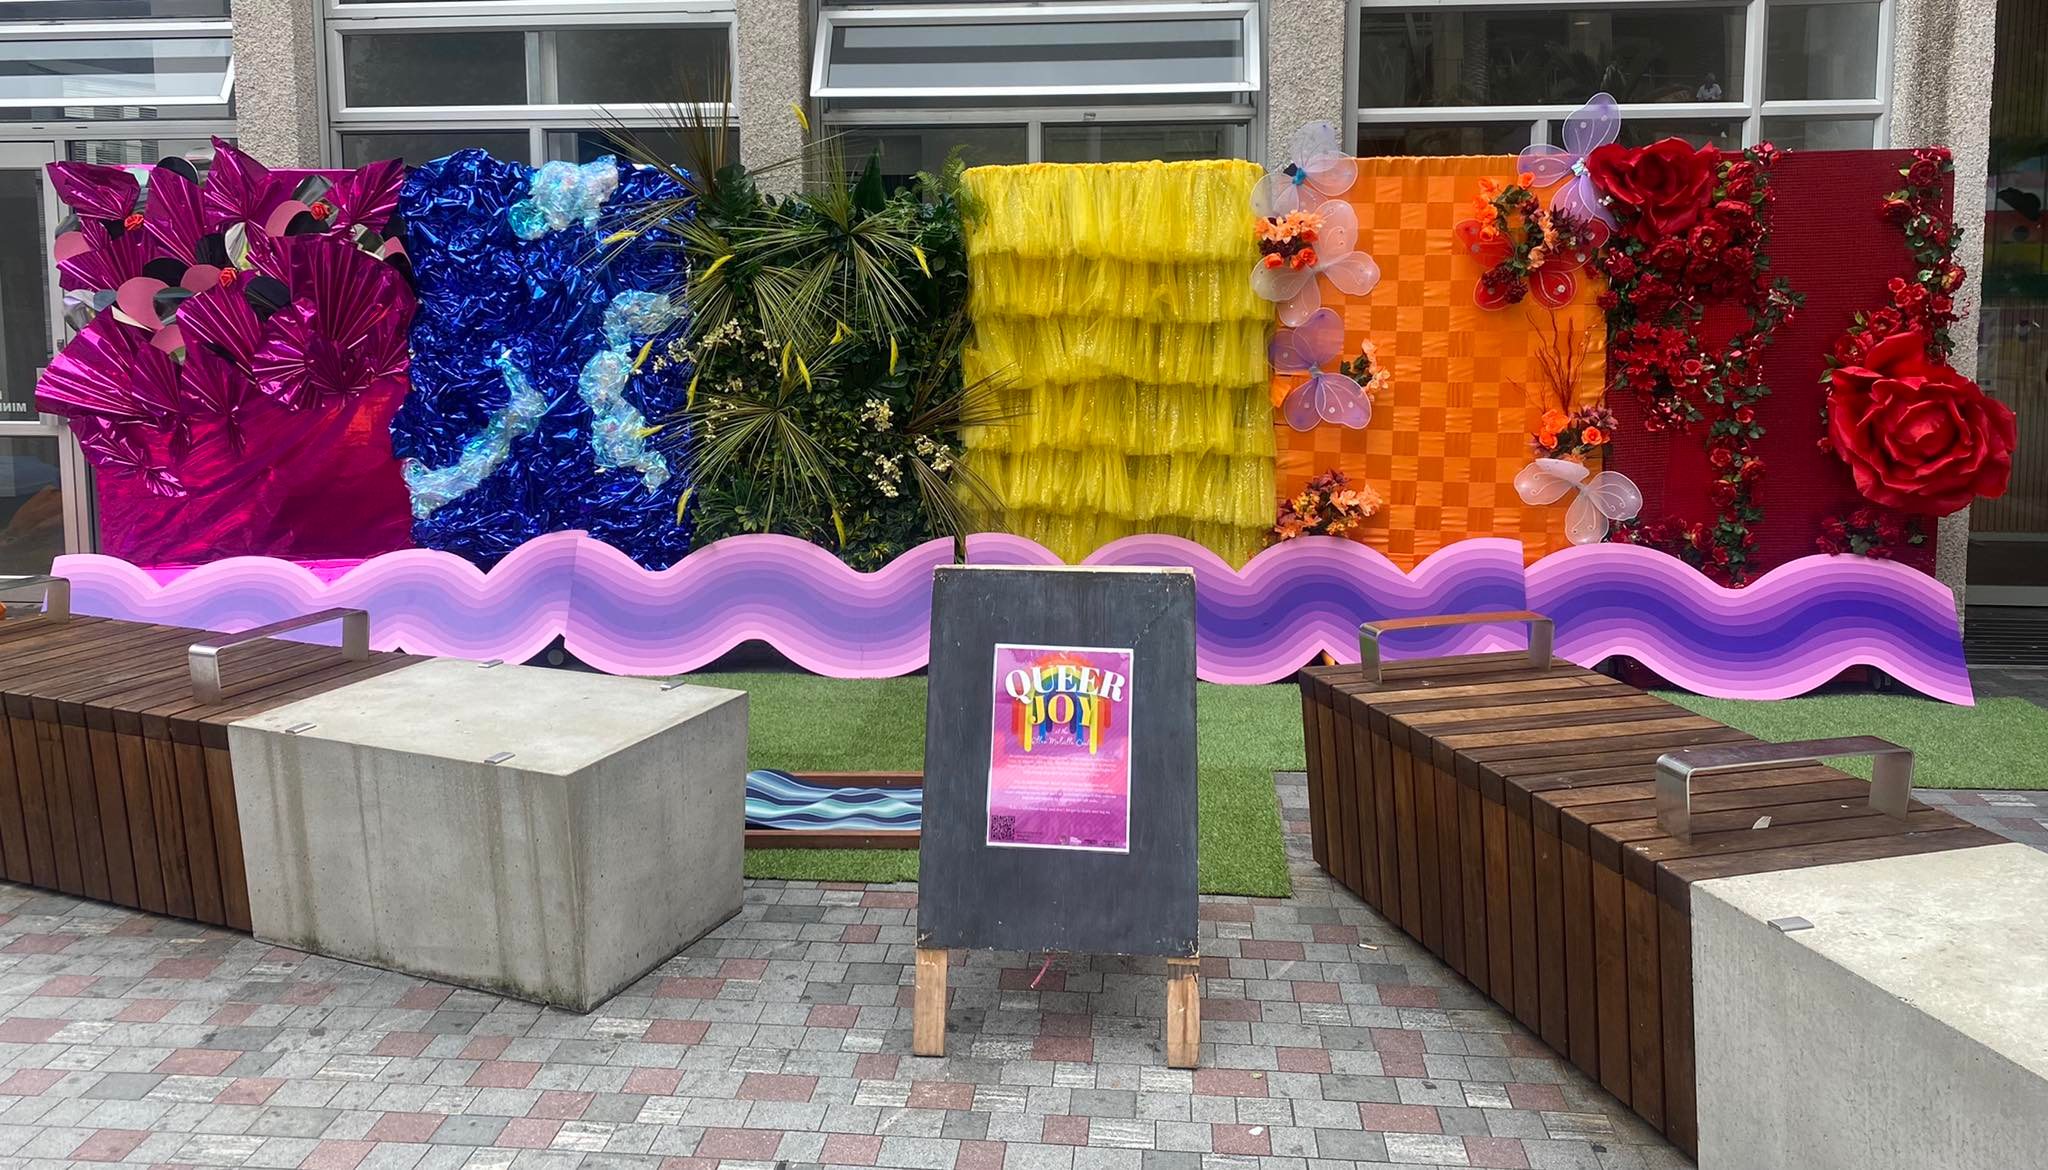 The Ellen Melville Centre Team have put together an amazing interactive and immerssive Rainbow Wall experience. The coloured walls represent the little things that give us joy in our daily lives and not to take life too seriously and just have fun.